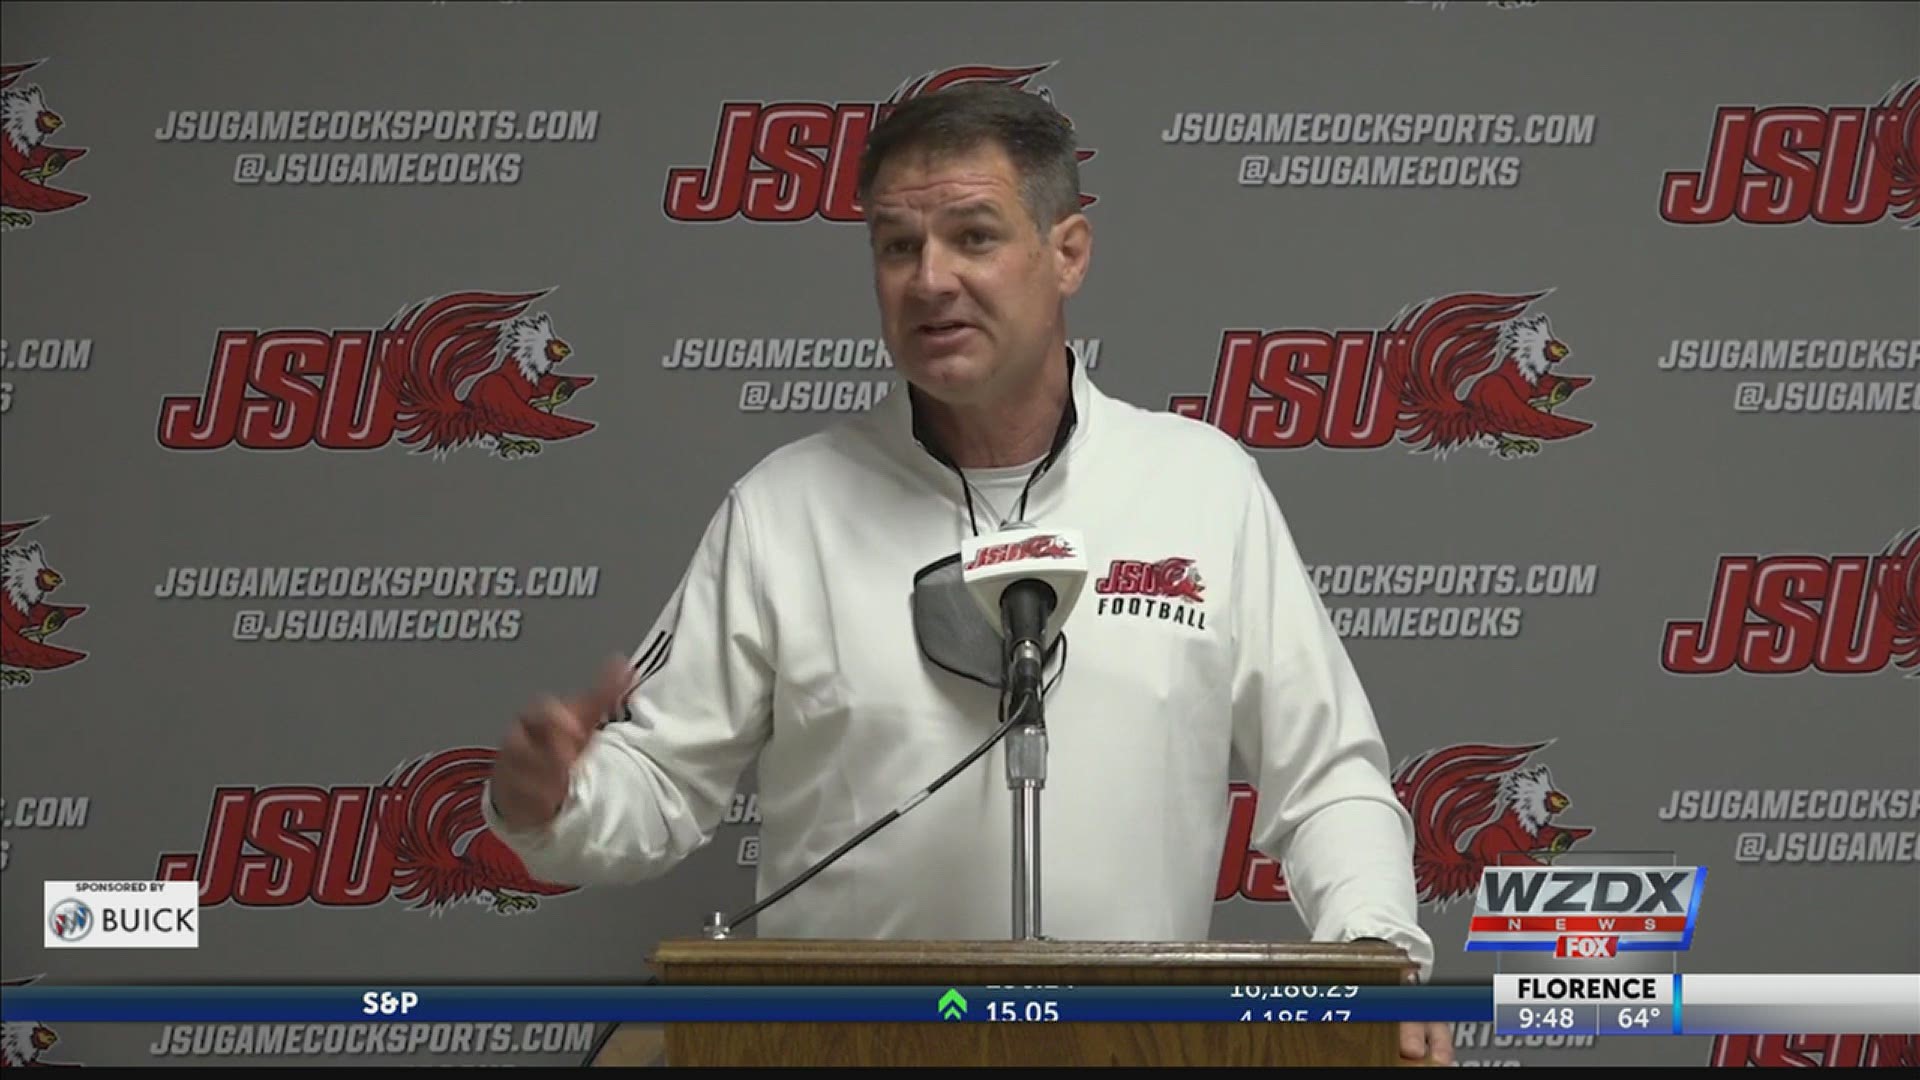 The Jacksonville State Gamecocks earned the No. 4 overall seed for the 2020-21 NCAA Division I Football Championship.